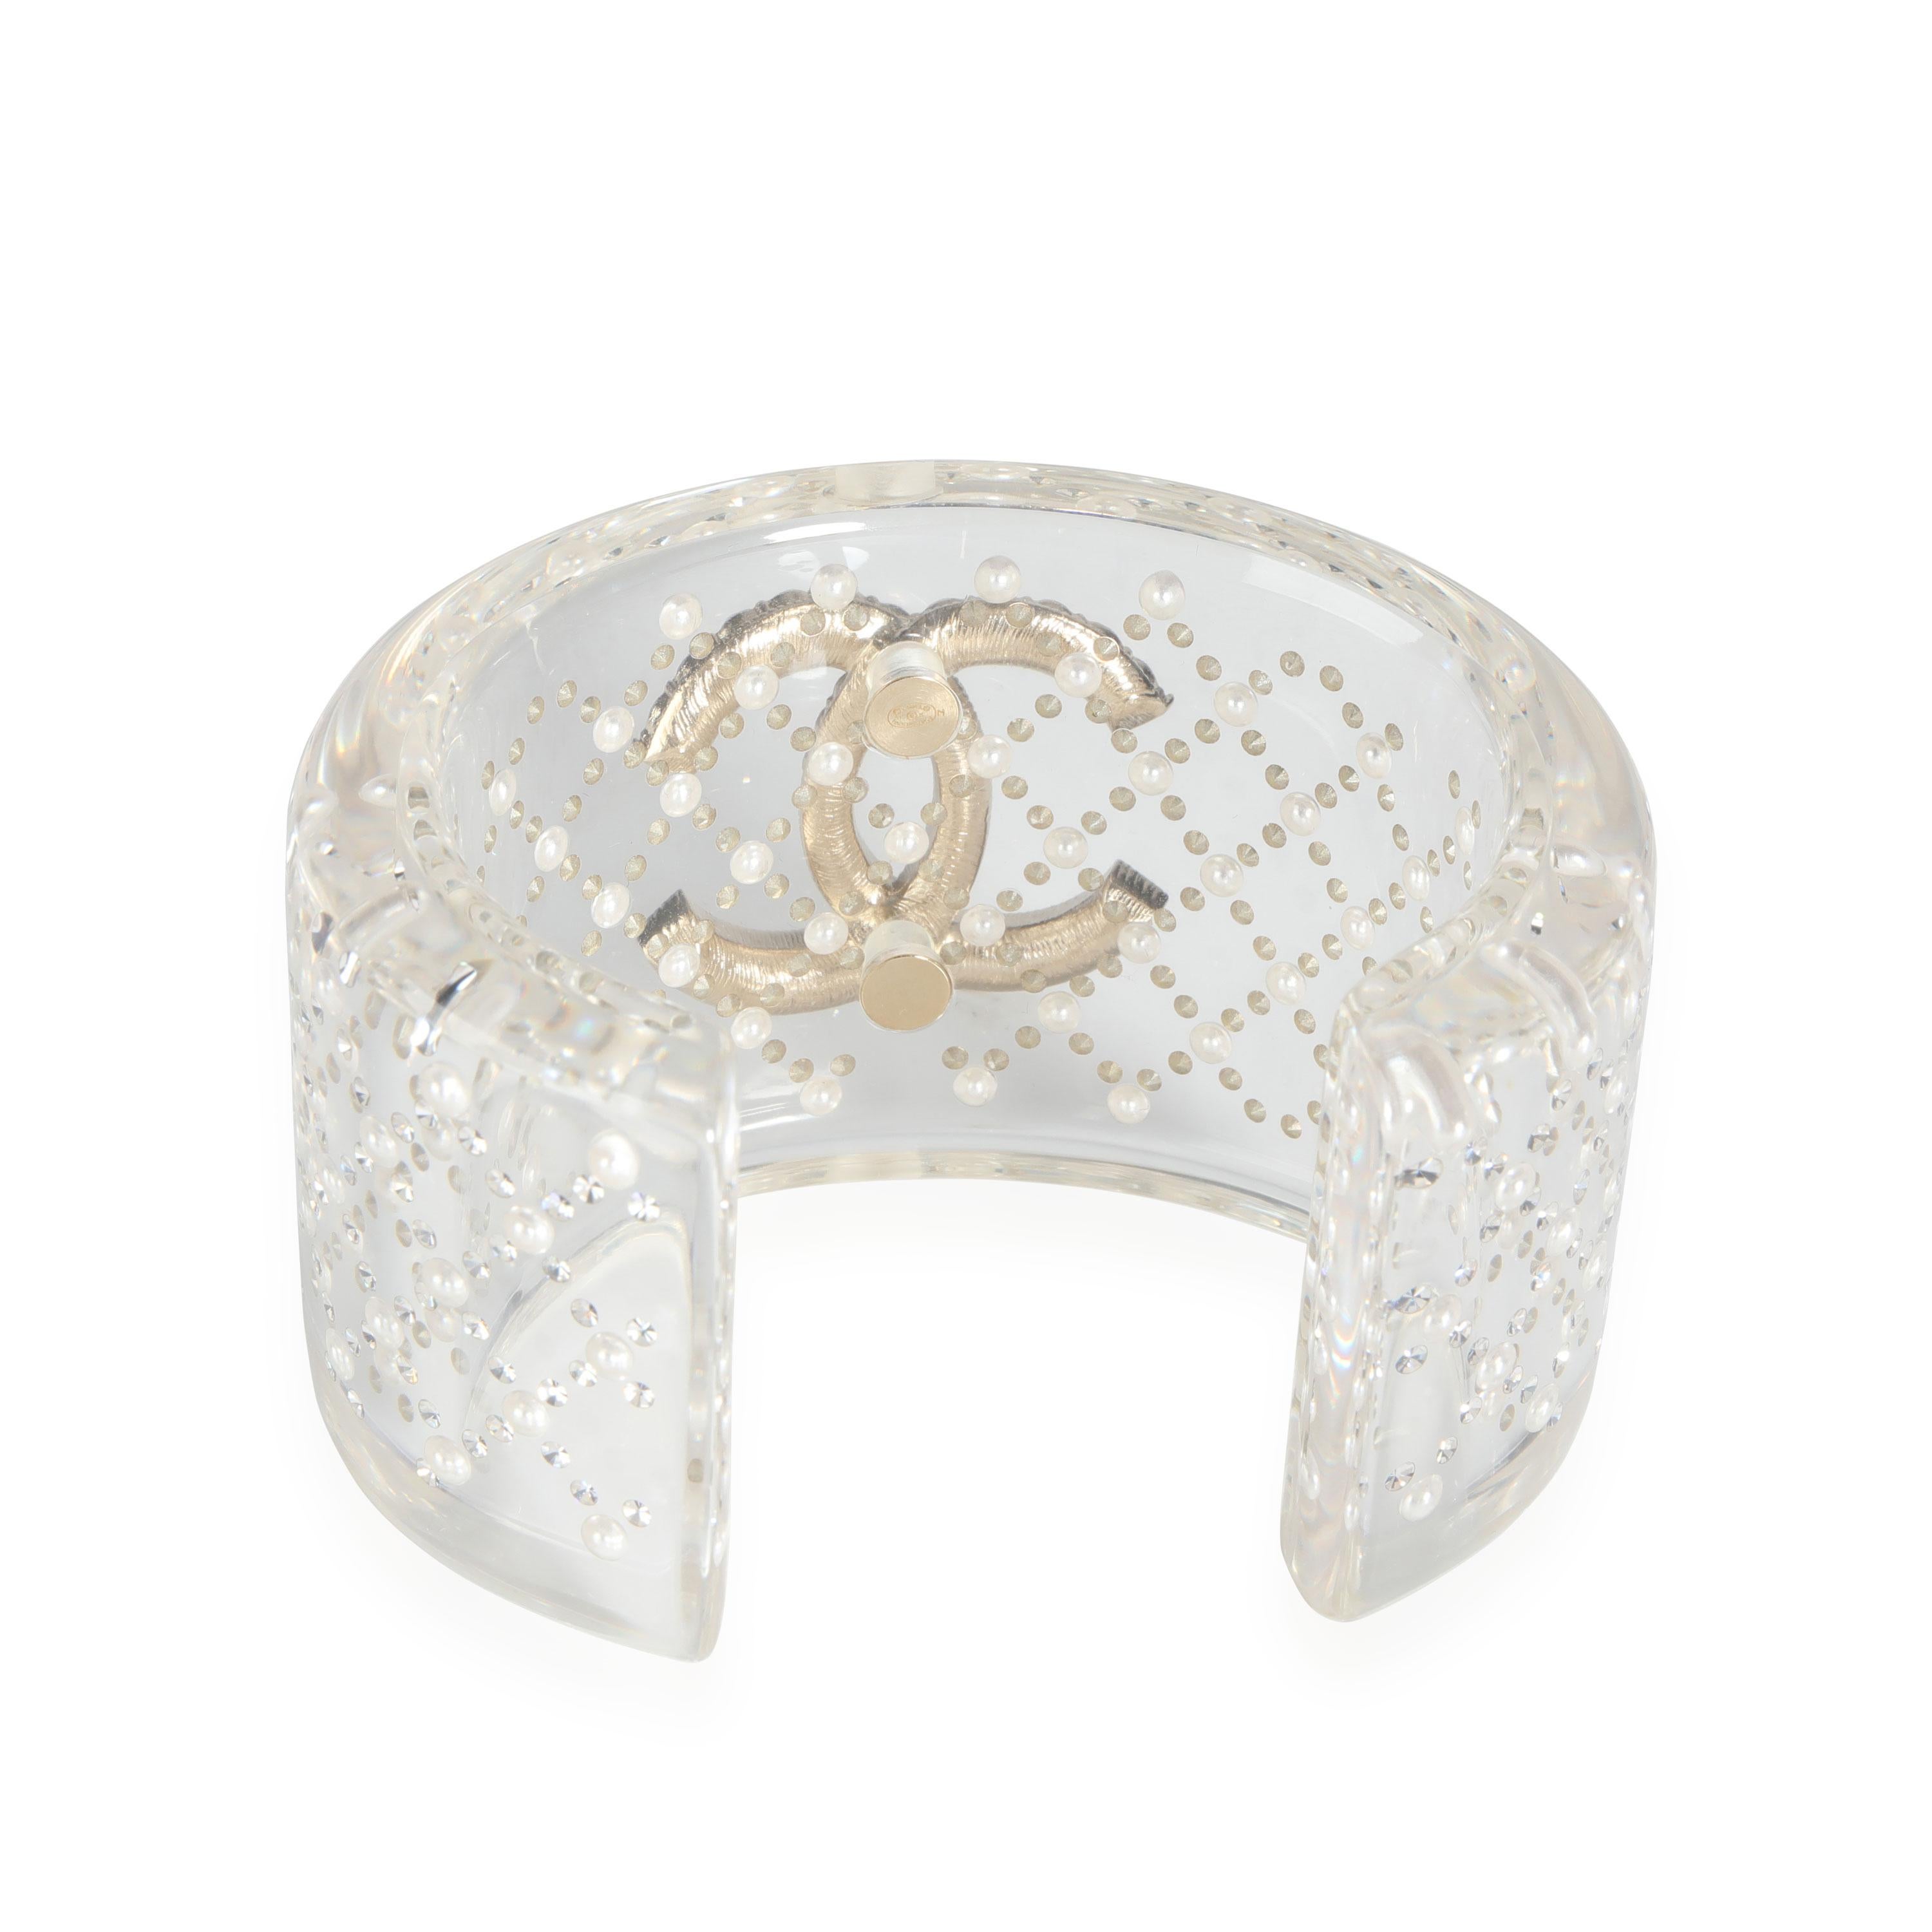 Chanel Clear Resin Strass & Pearl Double C Logo Wide Bangle

PRIMARY DETAILS
SKU: 111443
Listing Title: Chanel Clear Resin Strass & Pearl Double C Logo Wide Bangle
Condition Description: Retails for 1825 USD. In excellent condition and recently